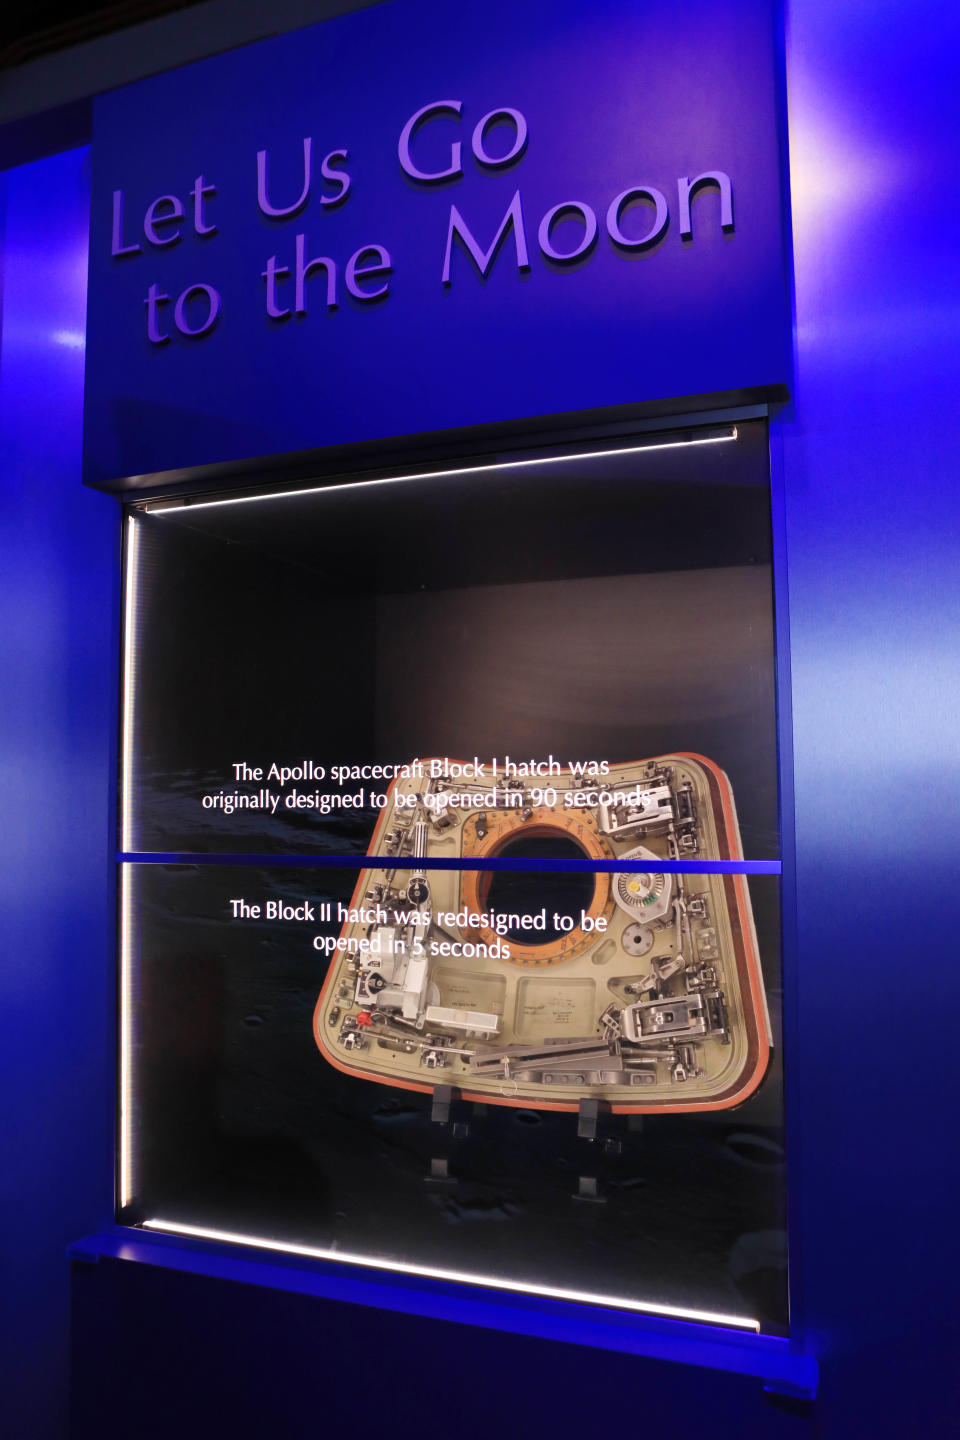 This Tuesday, Jan. 24, 2017 photo provided by NASA shows the Apollo 1 capsule hatch on display in an exhibit at the Kennedy Space Center in Titusville, Fla. On Jan. 27, 1967, a fire during a test on the launch pad killed three astronauts at the start of the Apollo moon program. (Kim Shiflett/NASA via AP)